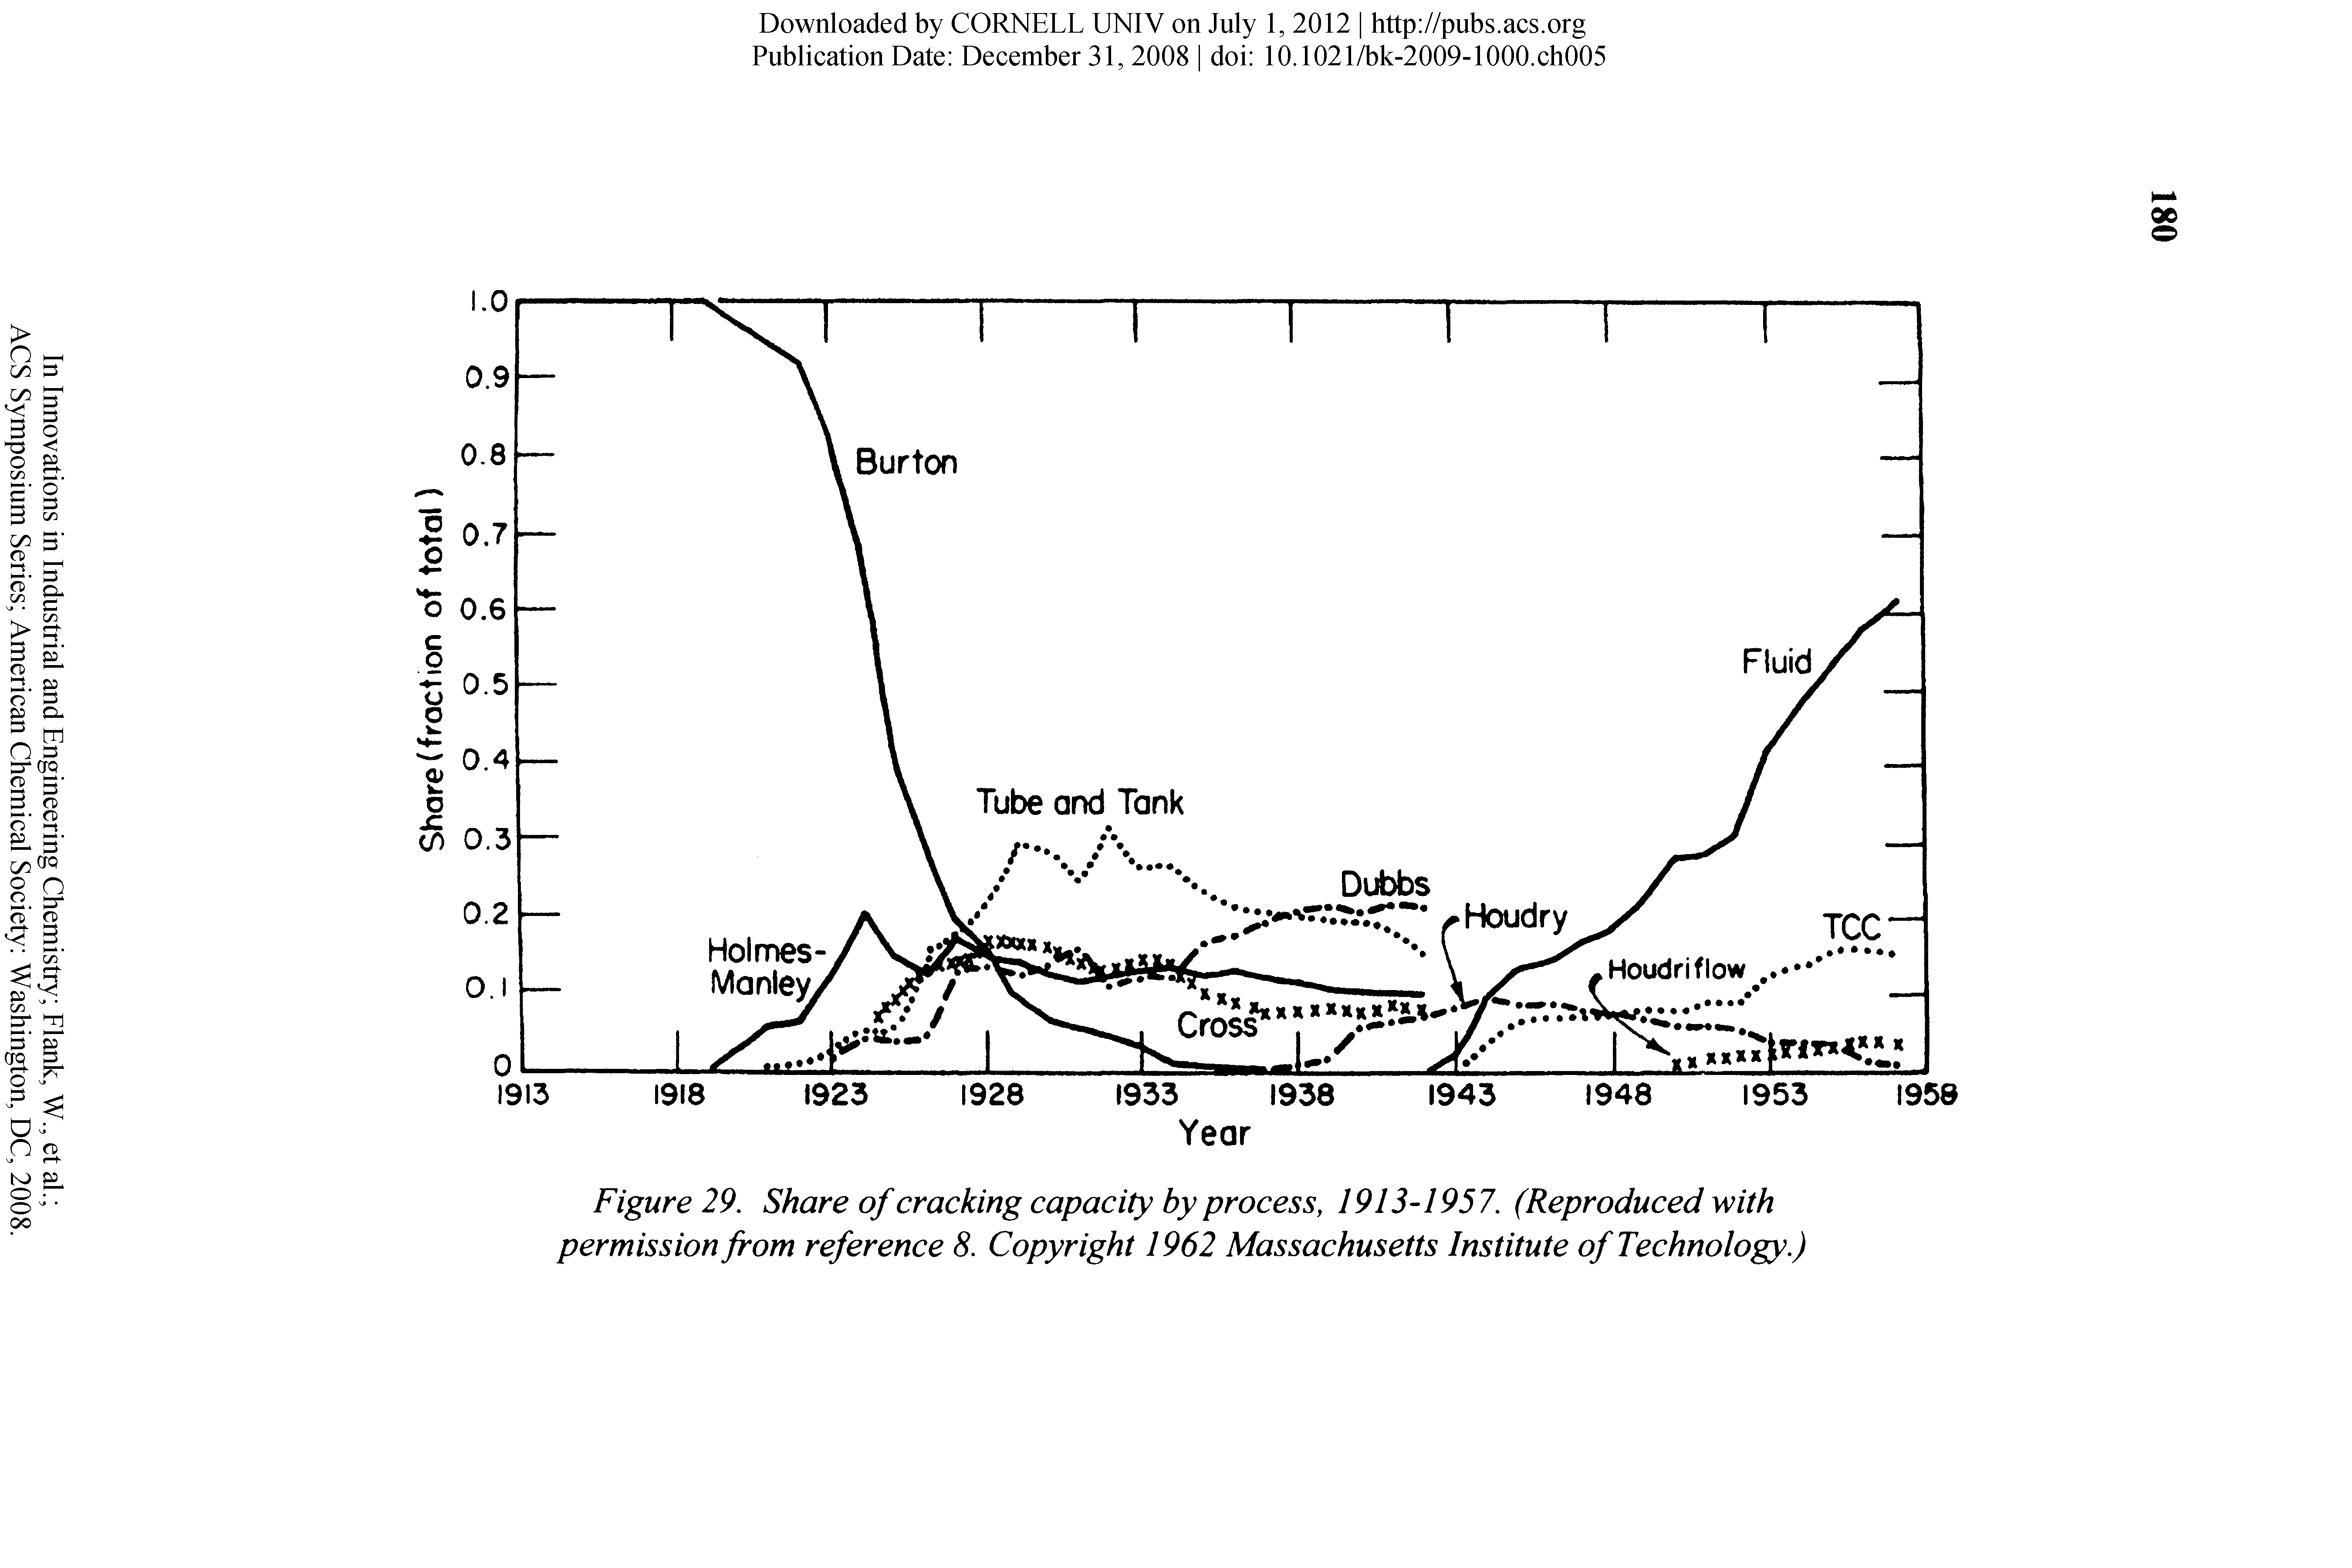 Figure 29. Share of cracking capacity by process, 1913-1957. (Reproduced with permission from reference 8. Copyright 1962 Massachusetts Institute of Technology.)...